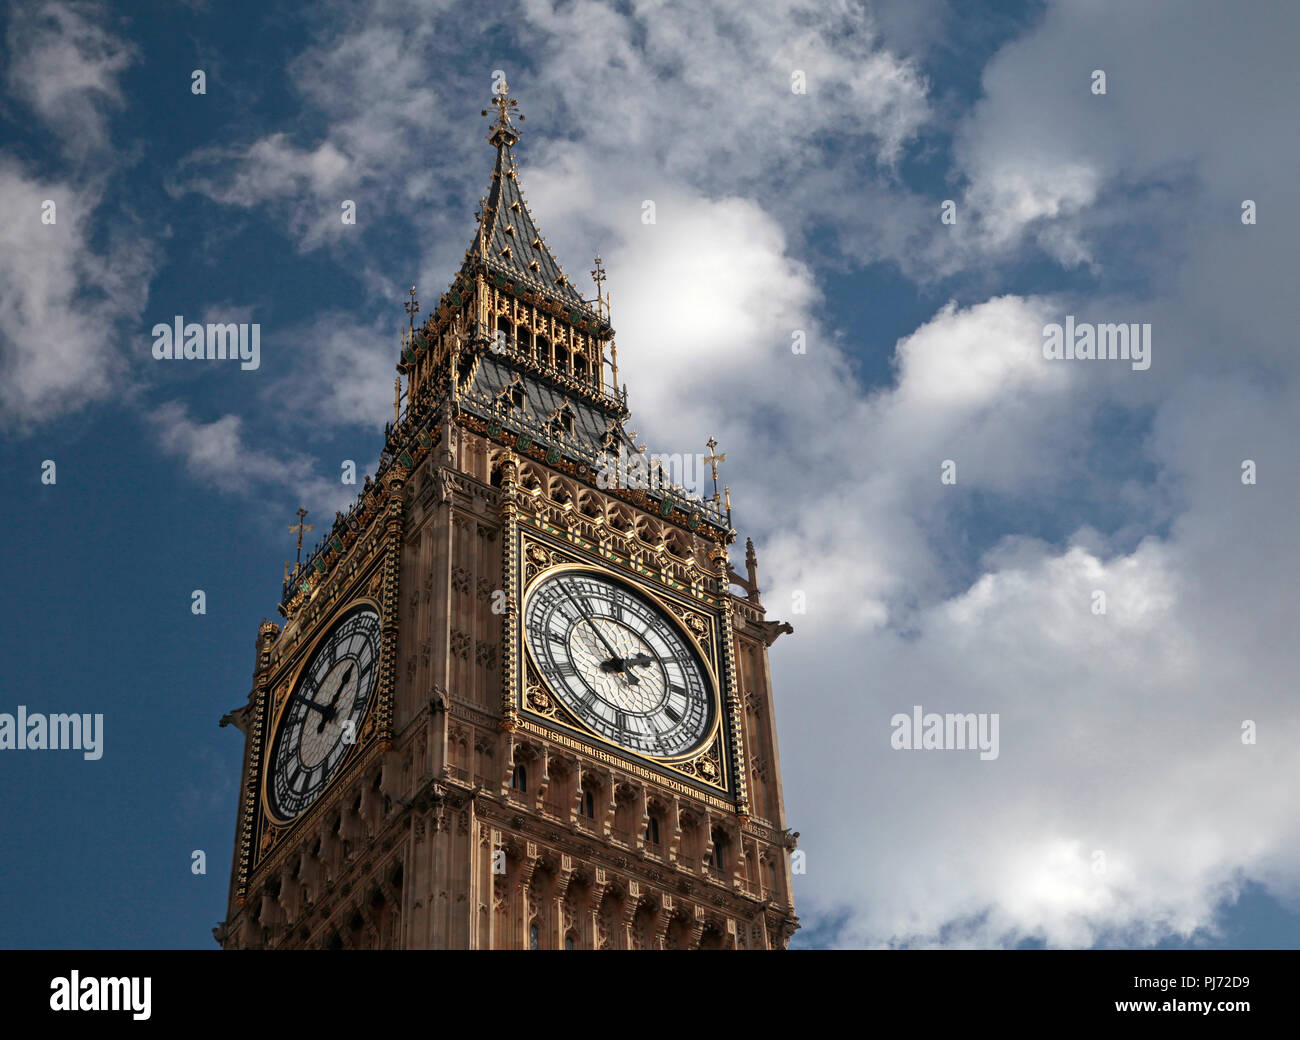 St Stephens Tower, Houses of Parliament, London (Big Ben) Stock Photo